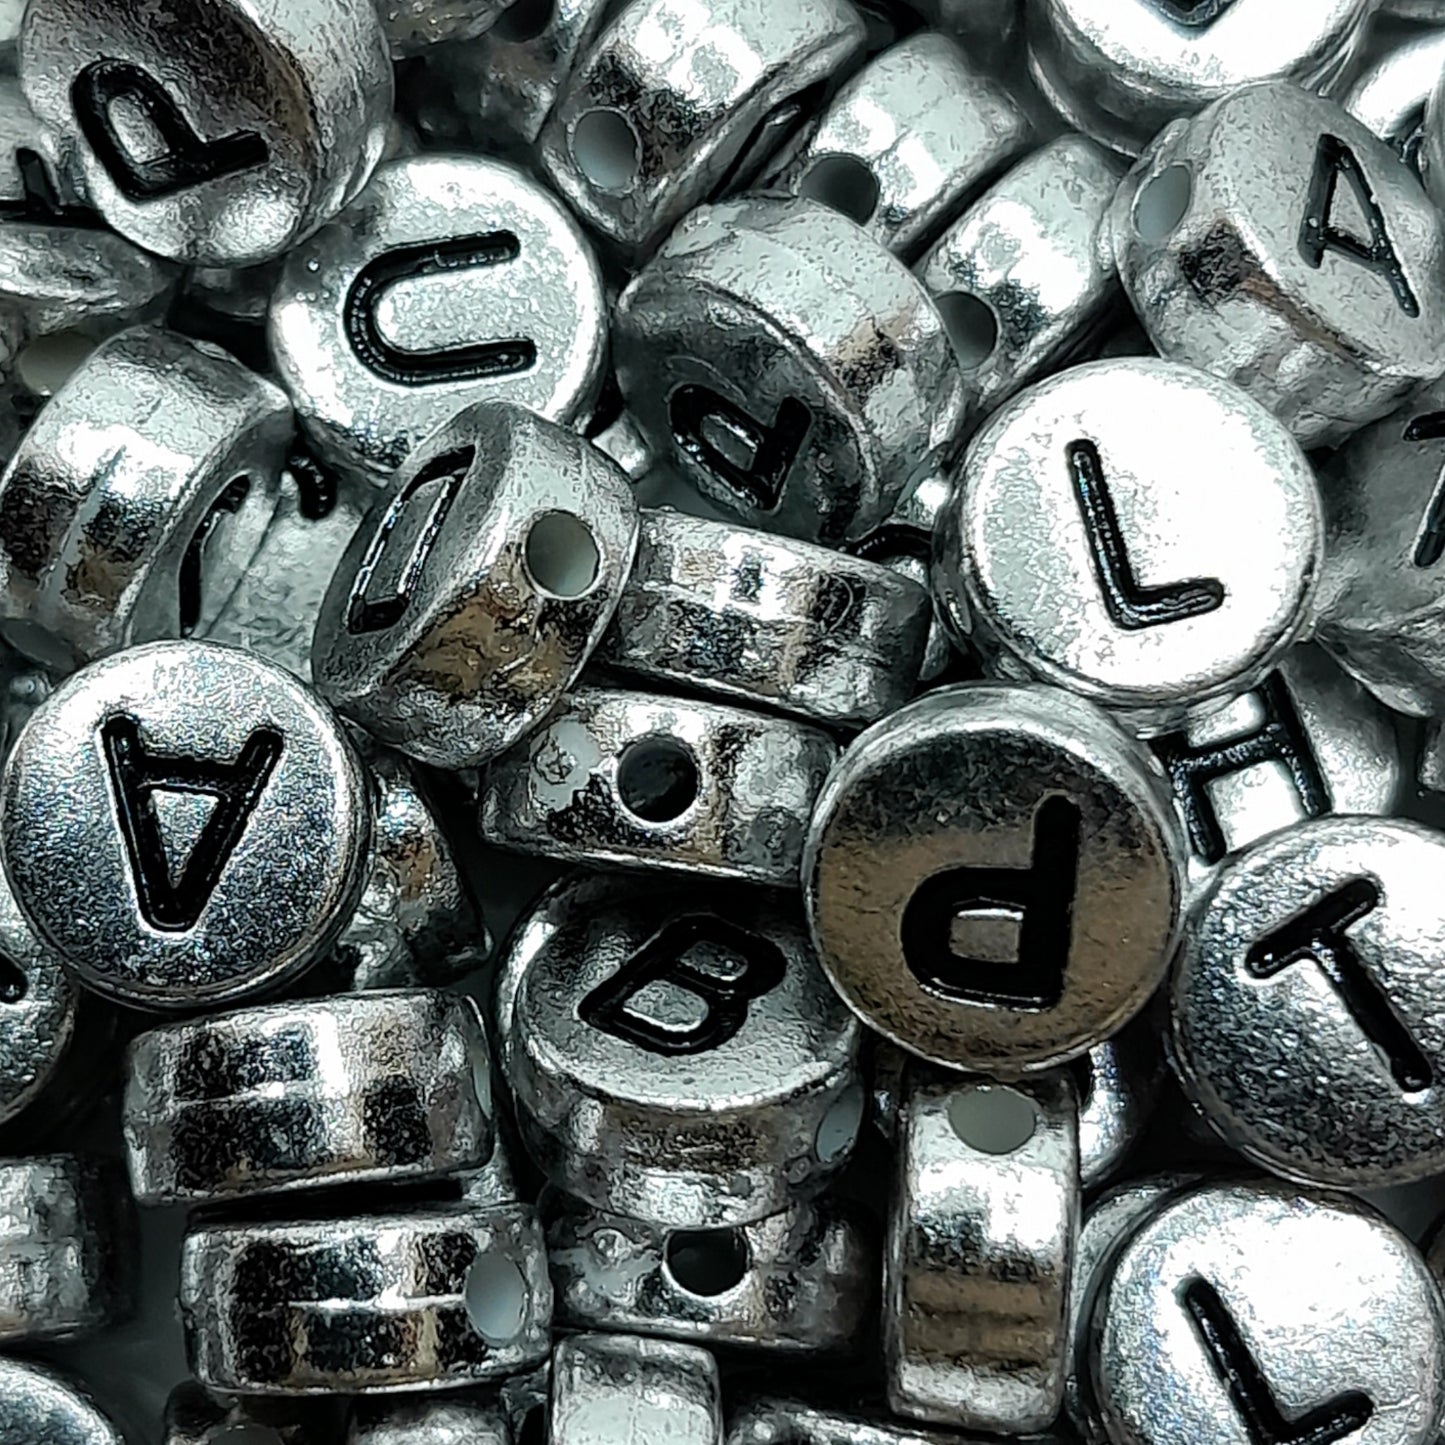 Beads with letters, numbers, emoticons for making bracelets and jewelry - VadymShop